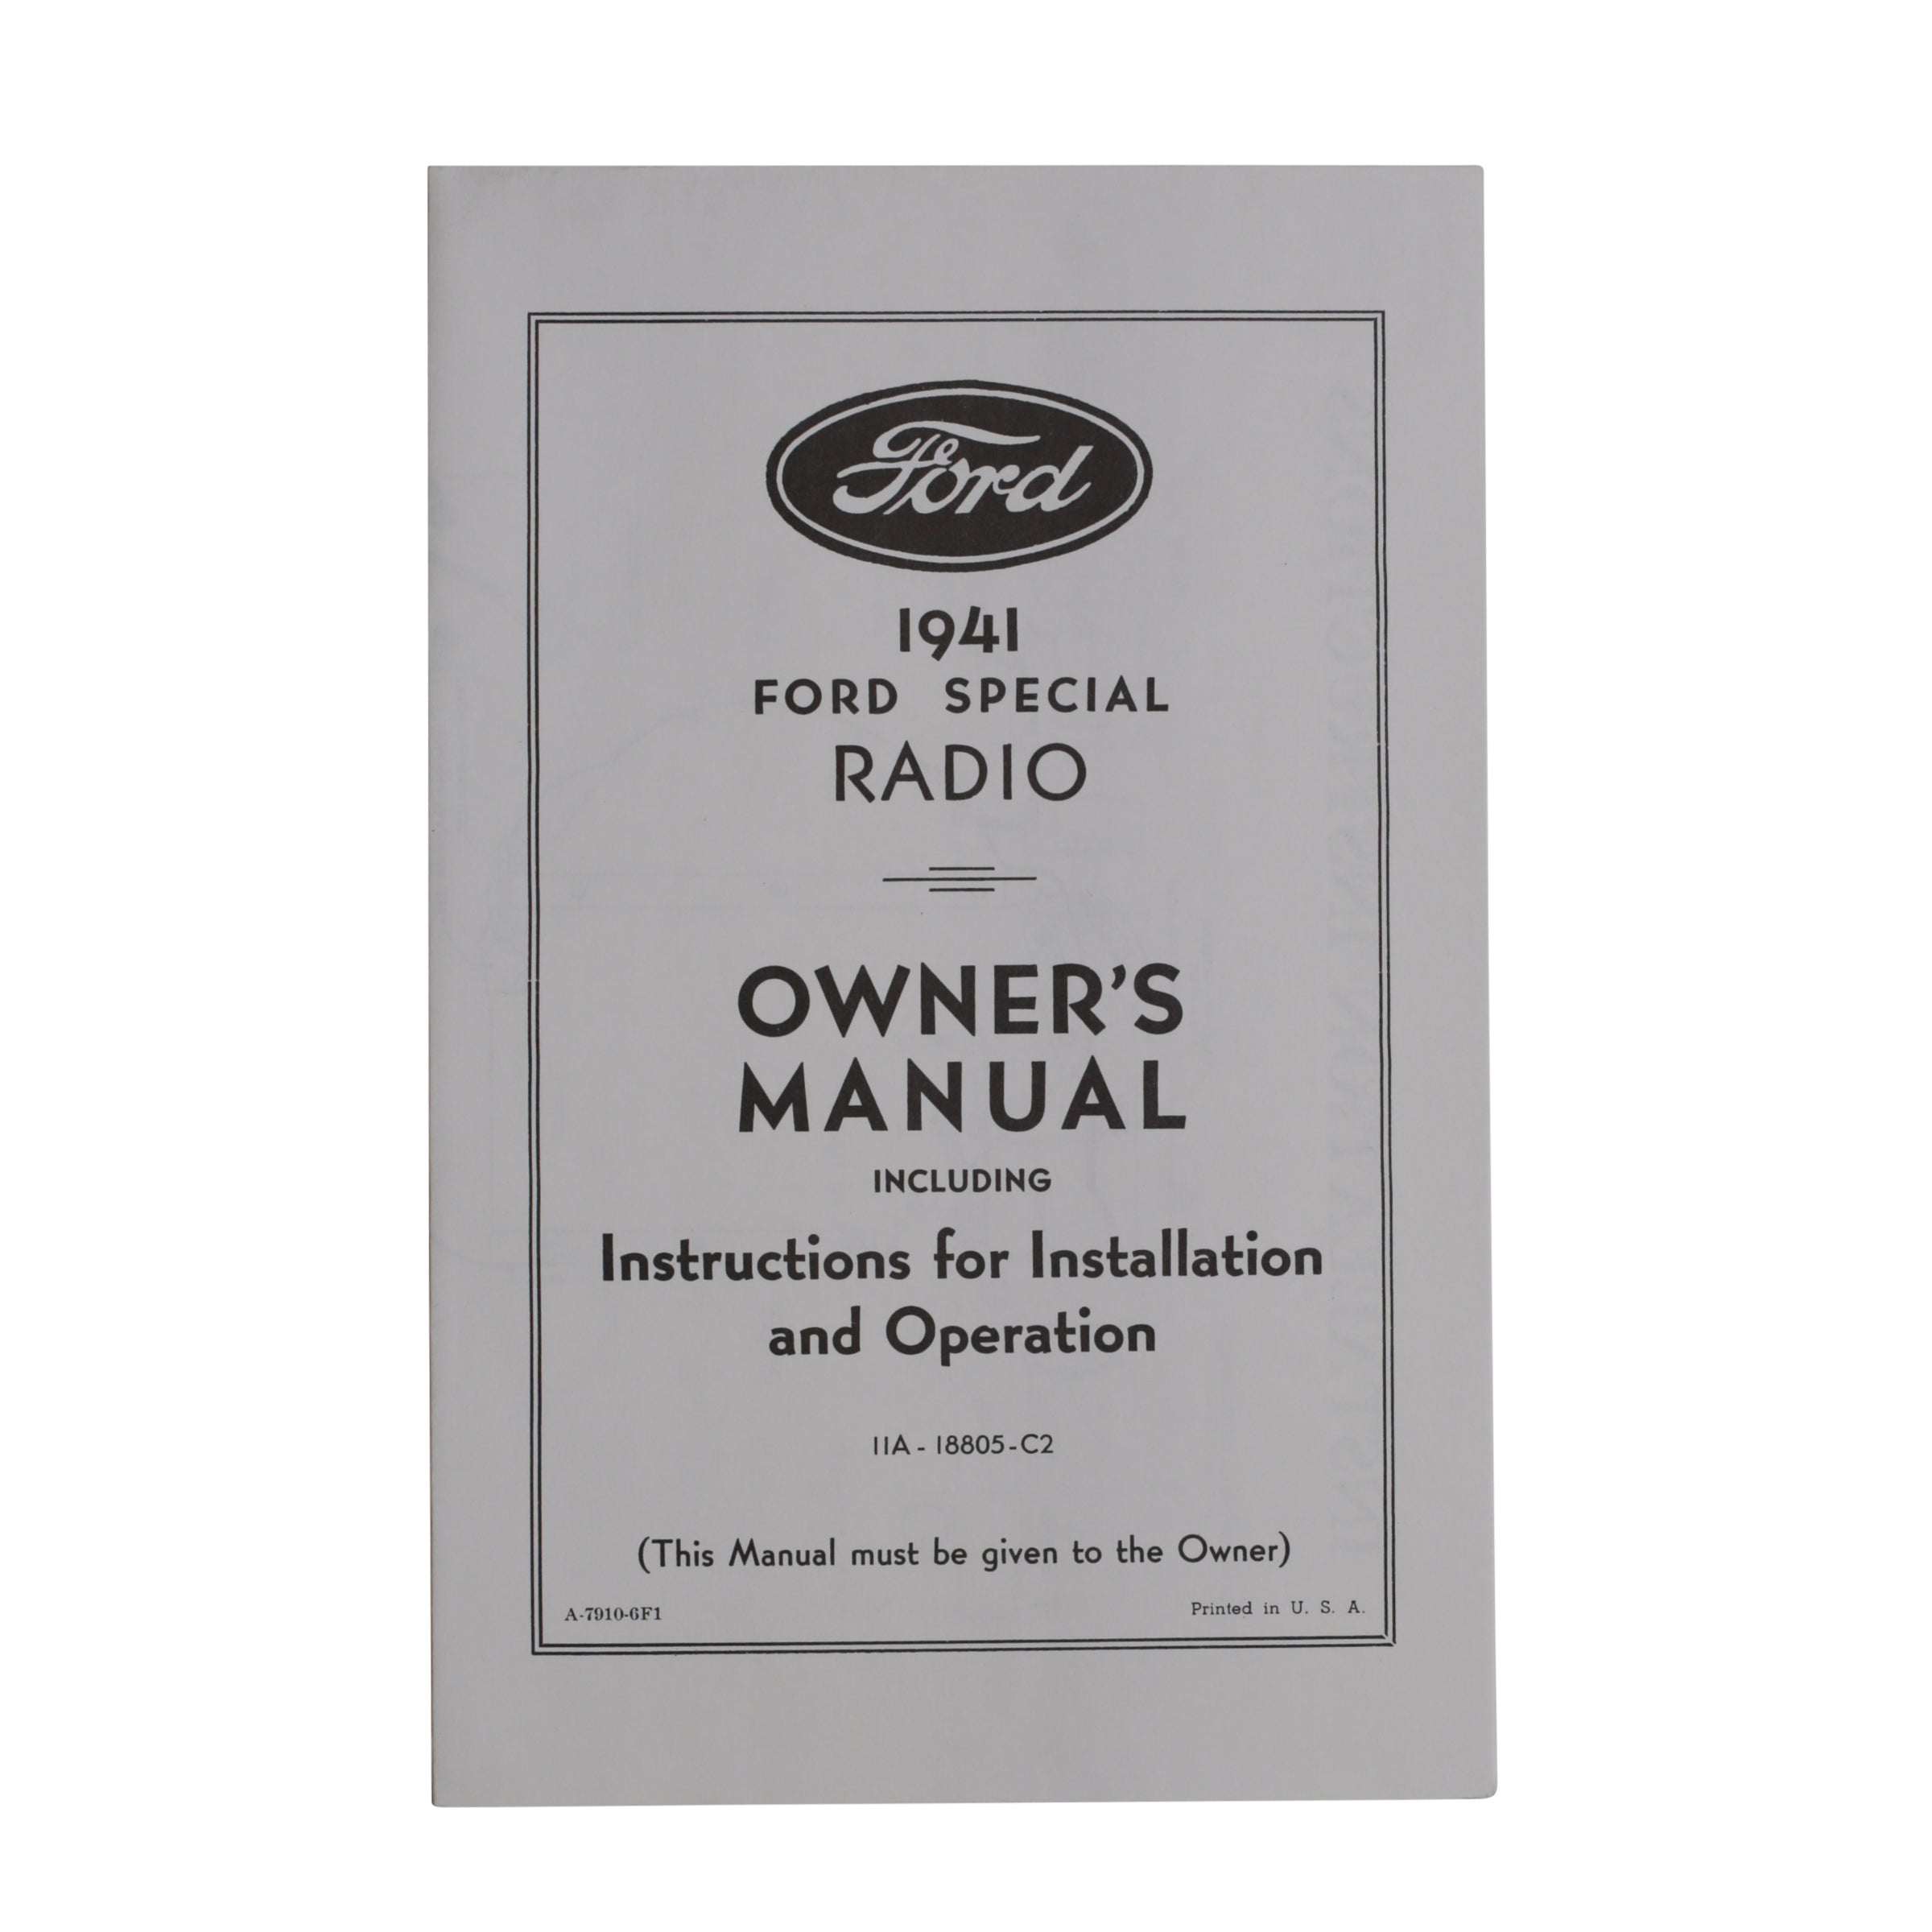 Radio Owners Manual  • 1941 Ford